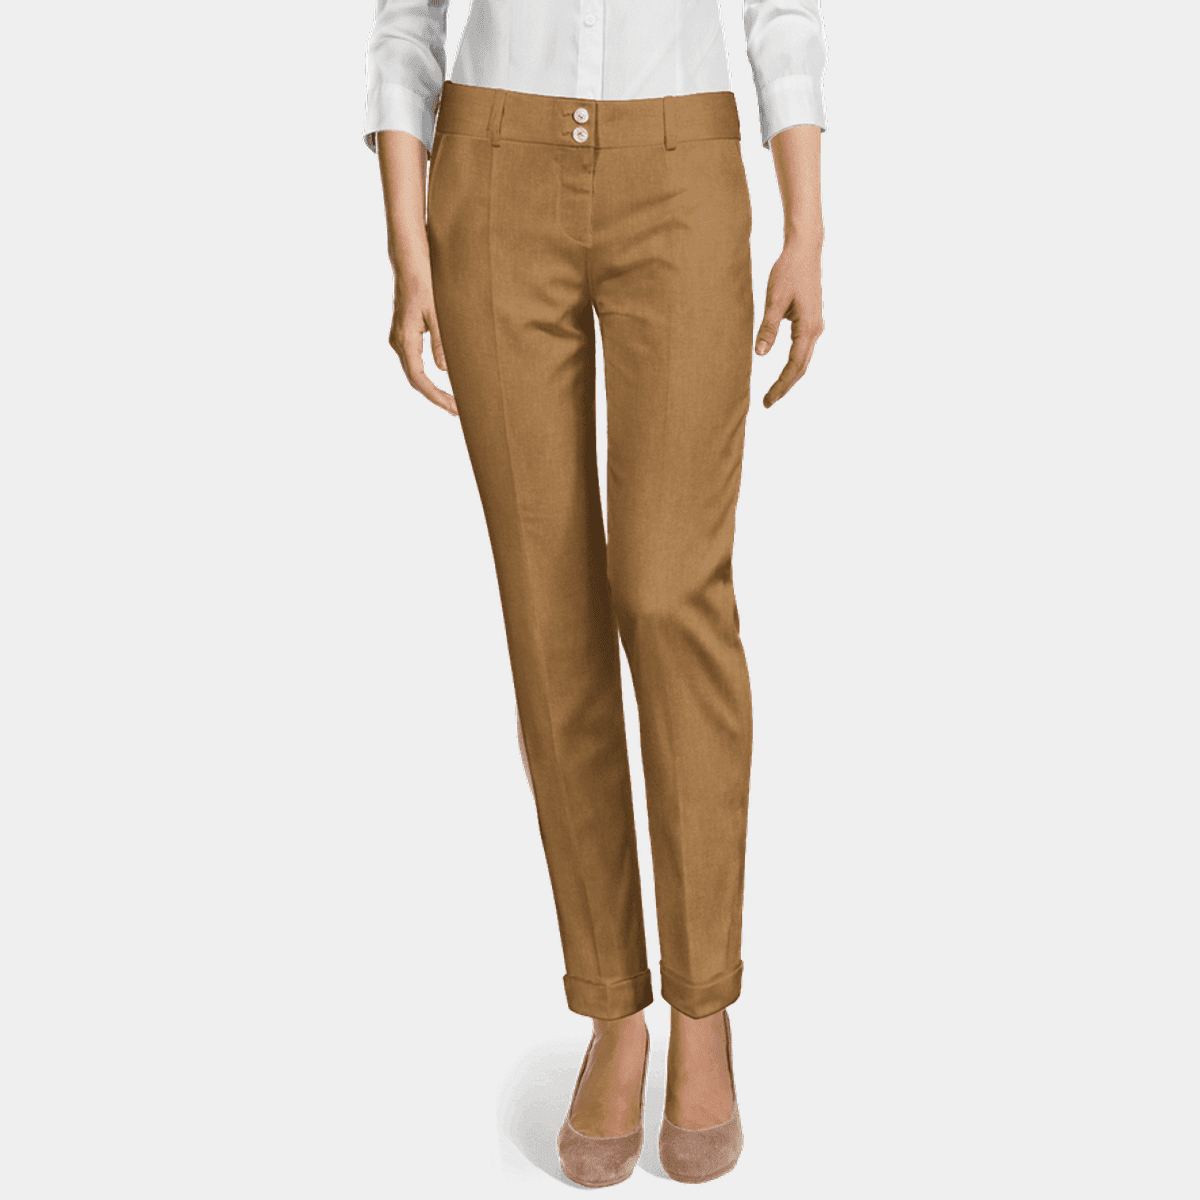 Women's Cuffed Anklelength Pants Sumissura